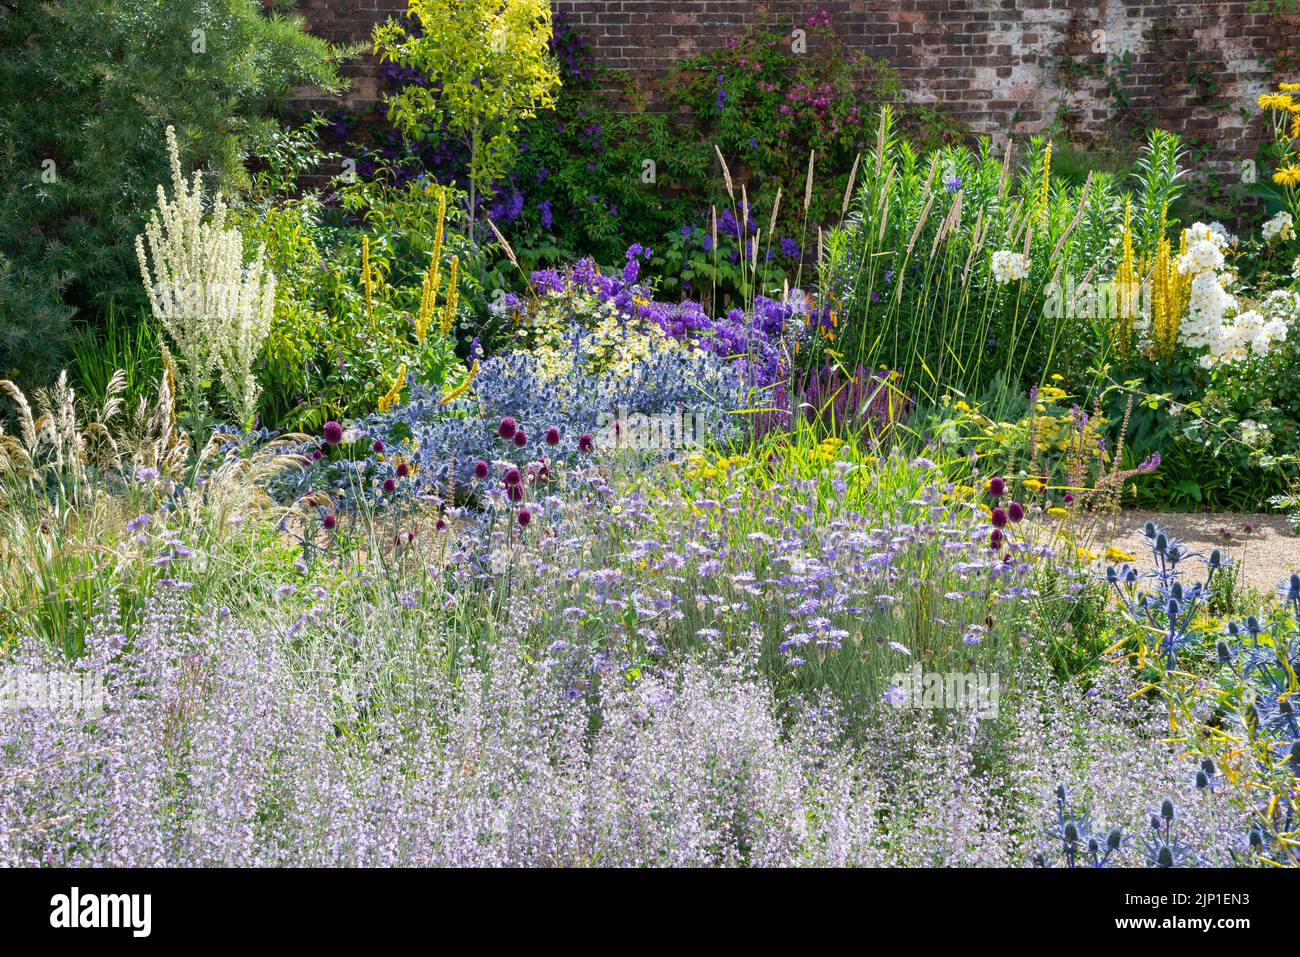 The Paradise garden at RHS Bridgewater, Worsley, Greater Manchester, England. Stock Photo